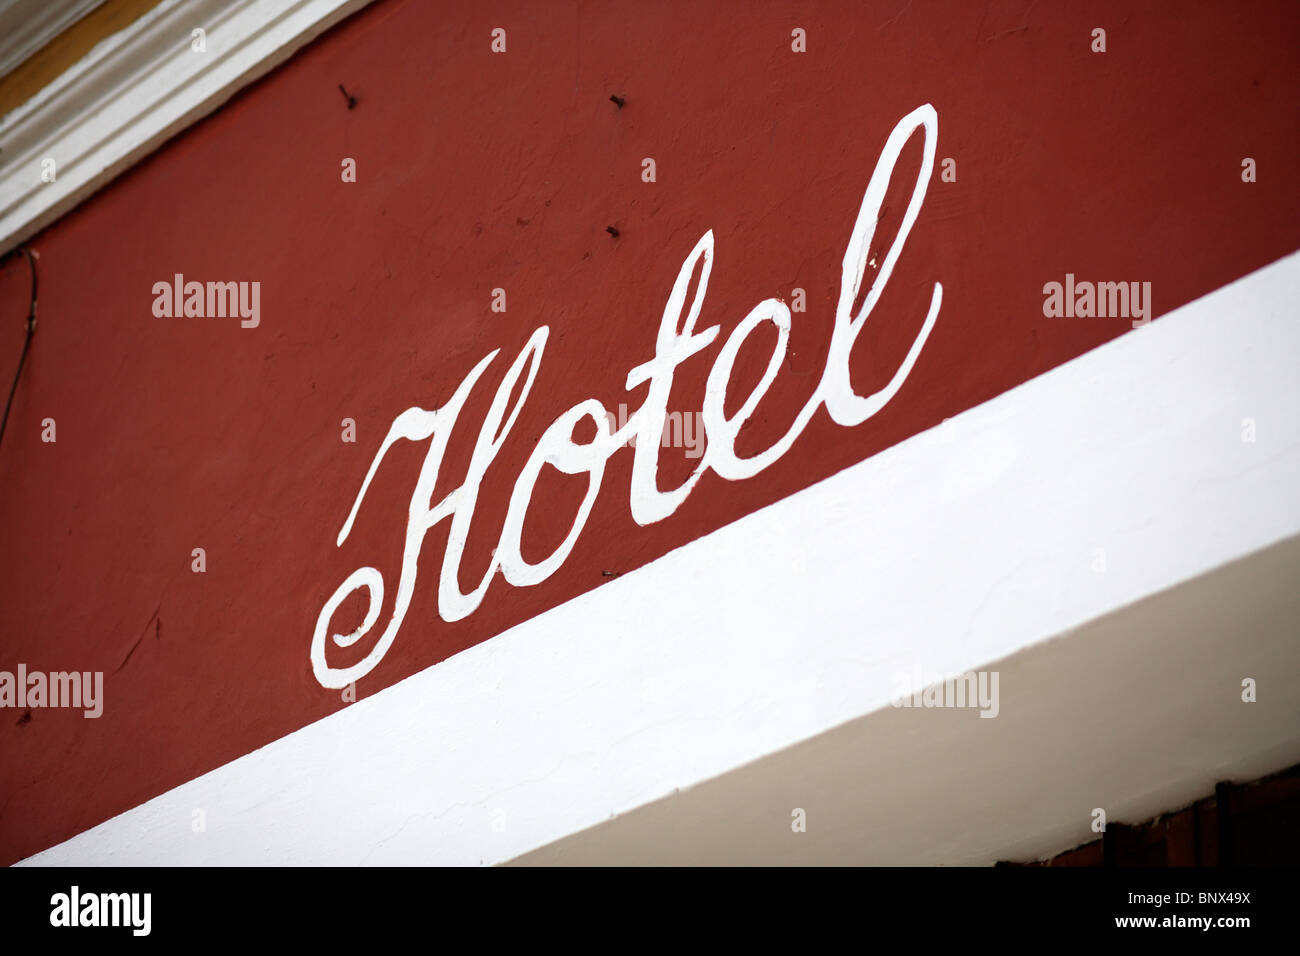 A sign for a hotel painted onto a colourful red wall in Antigua near Guatemala City Stock Photo